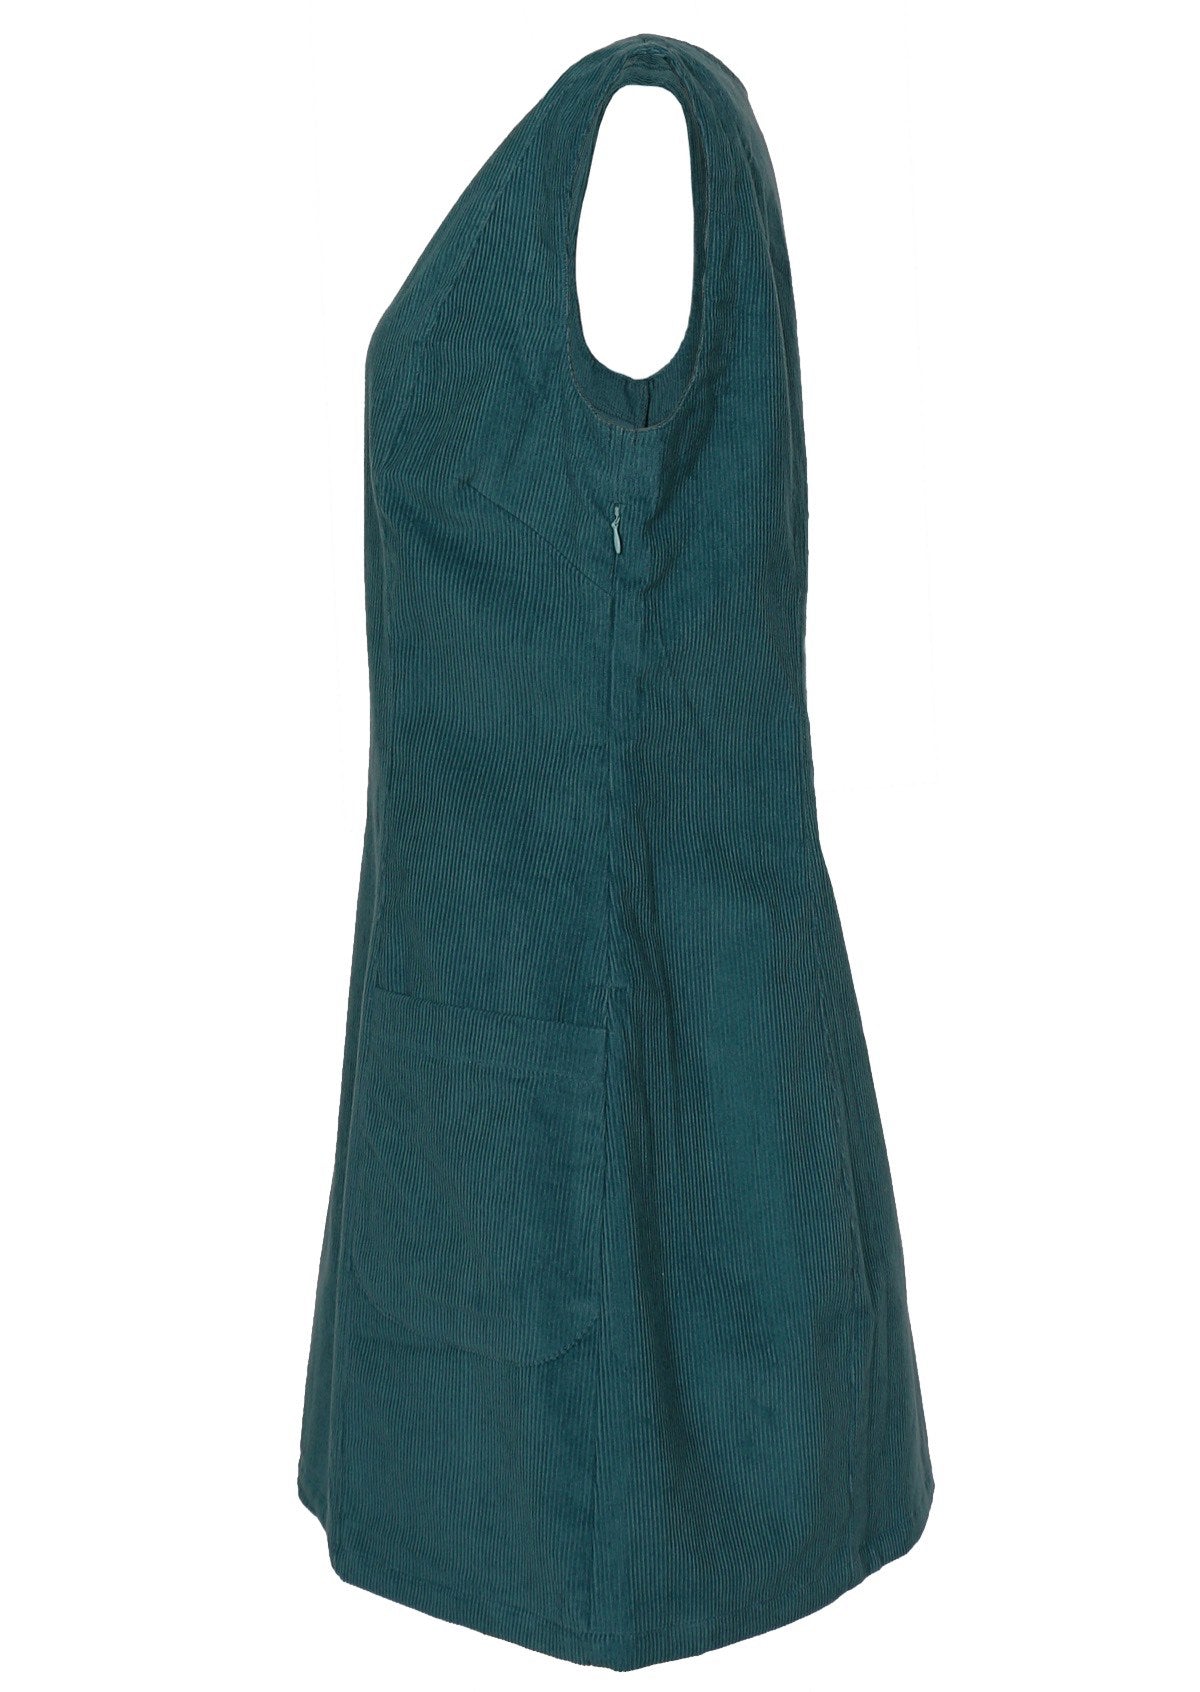 Deep teal 100% cotton dress with a side zip. 